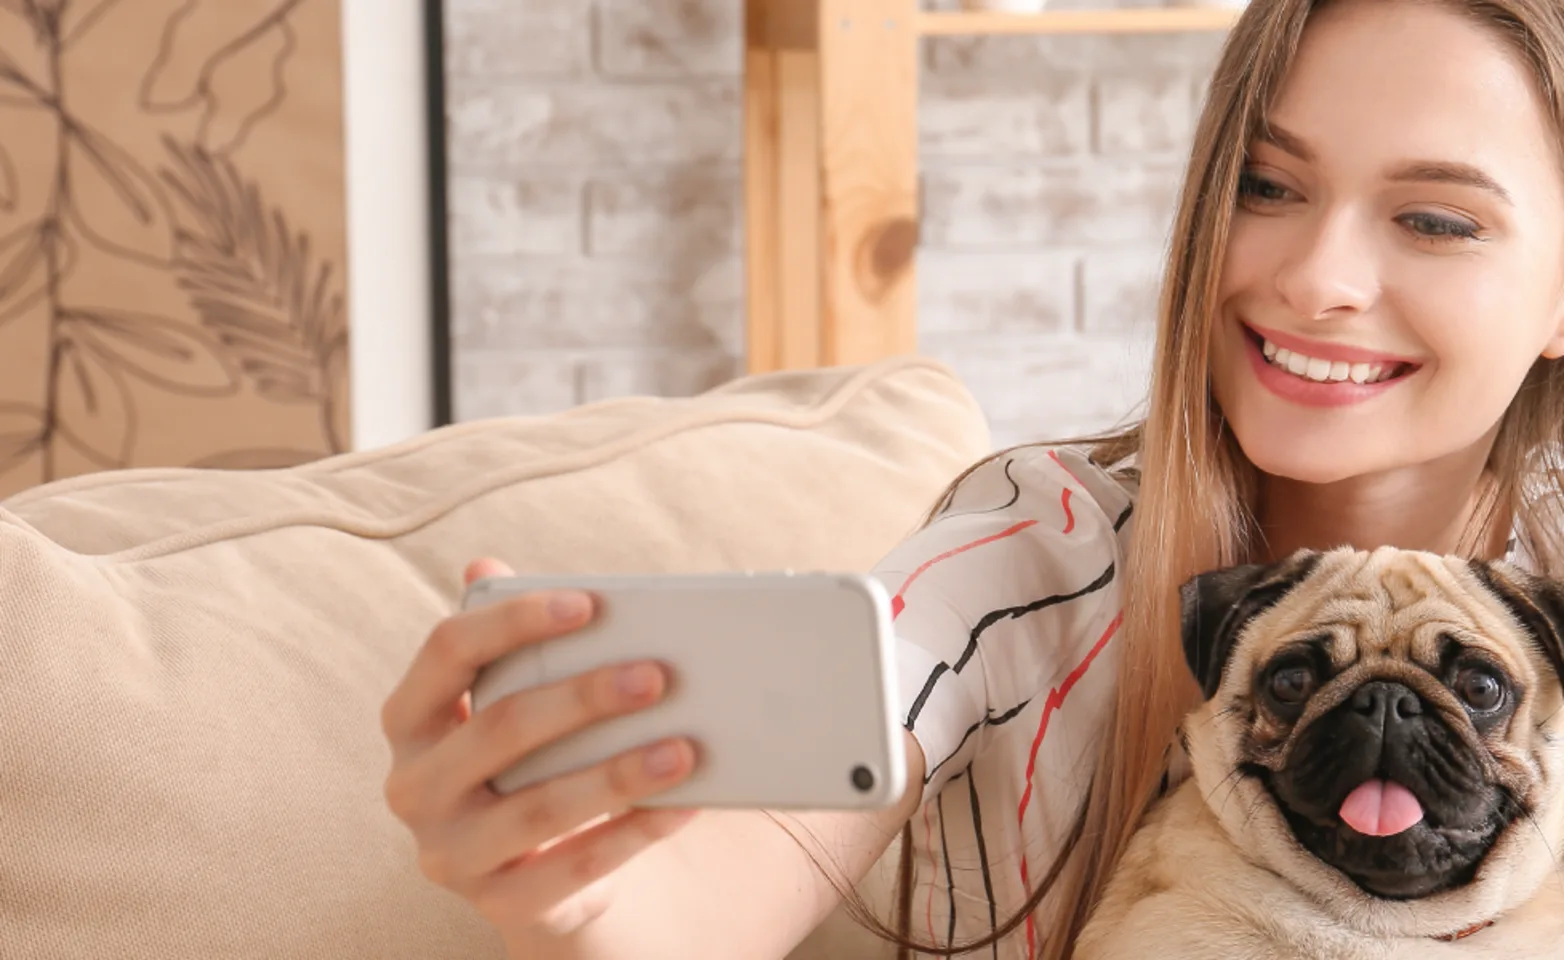 Women holding a phone pointing at dog